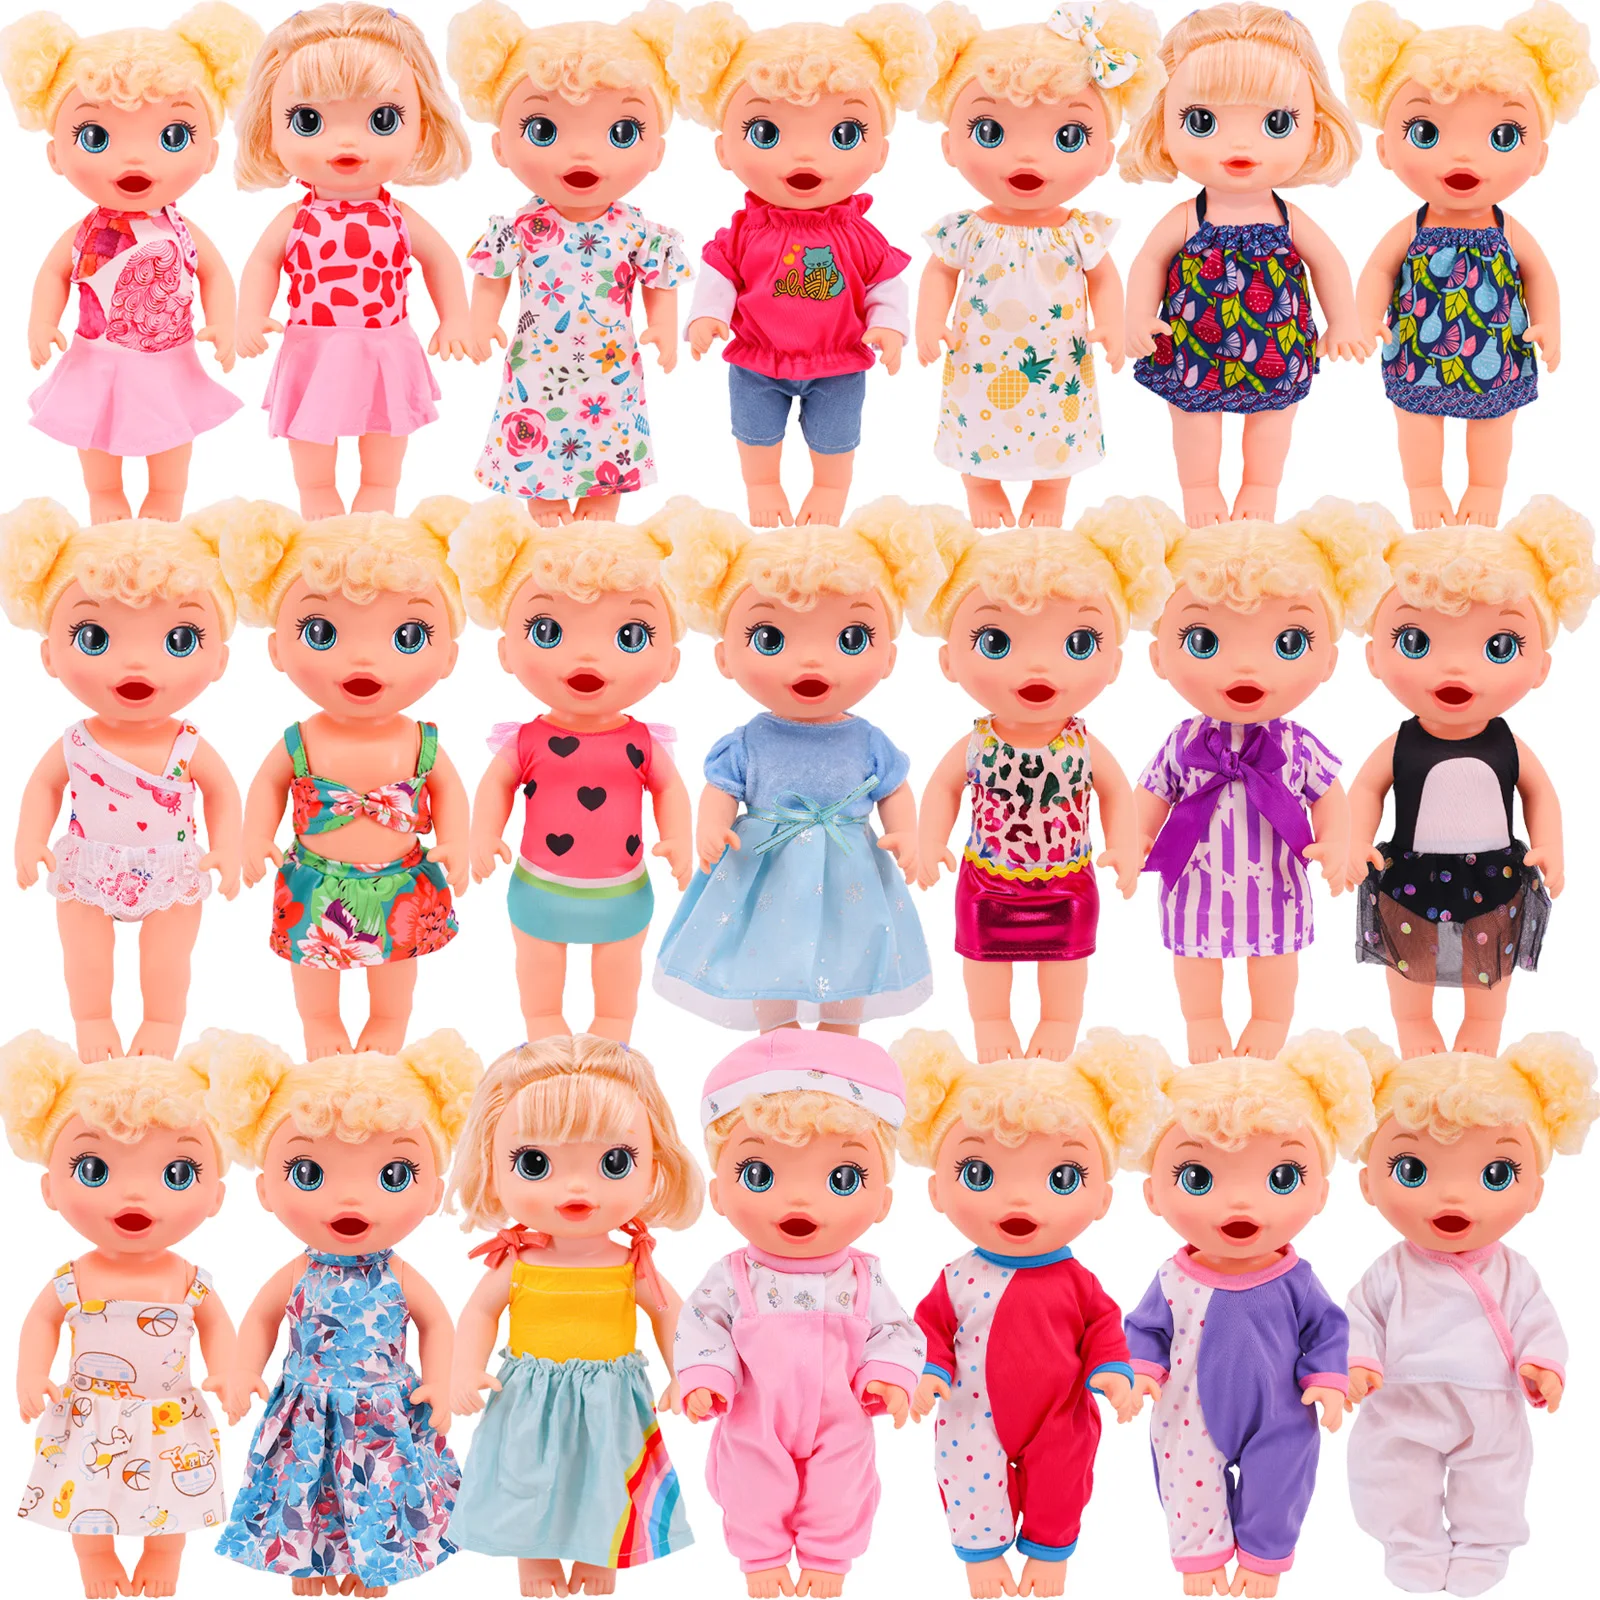 Handmade Baby Doll Clothes 12inch Alive Baby doll Clothes and 14inch American Girl Doll Clothes Accessories Our Generation